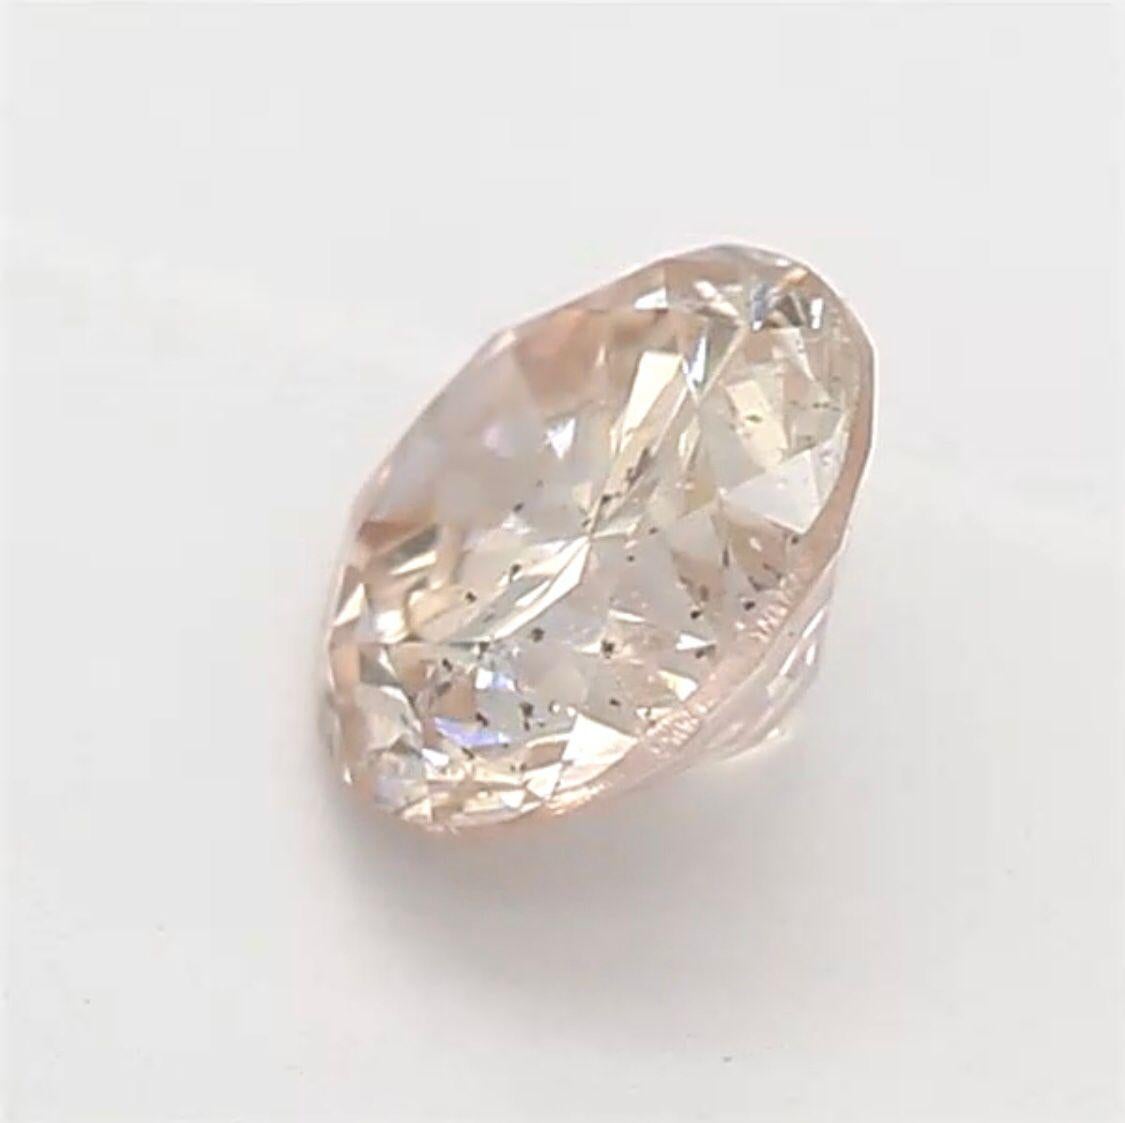 Women's or Men's 0.28 Carat Light Orangy Pink Round Shaped Diamond SI2 Clarity CGL Certified For Sale